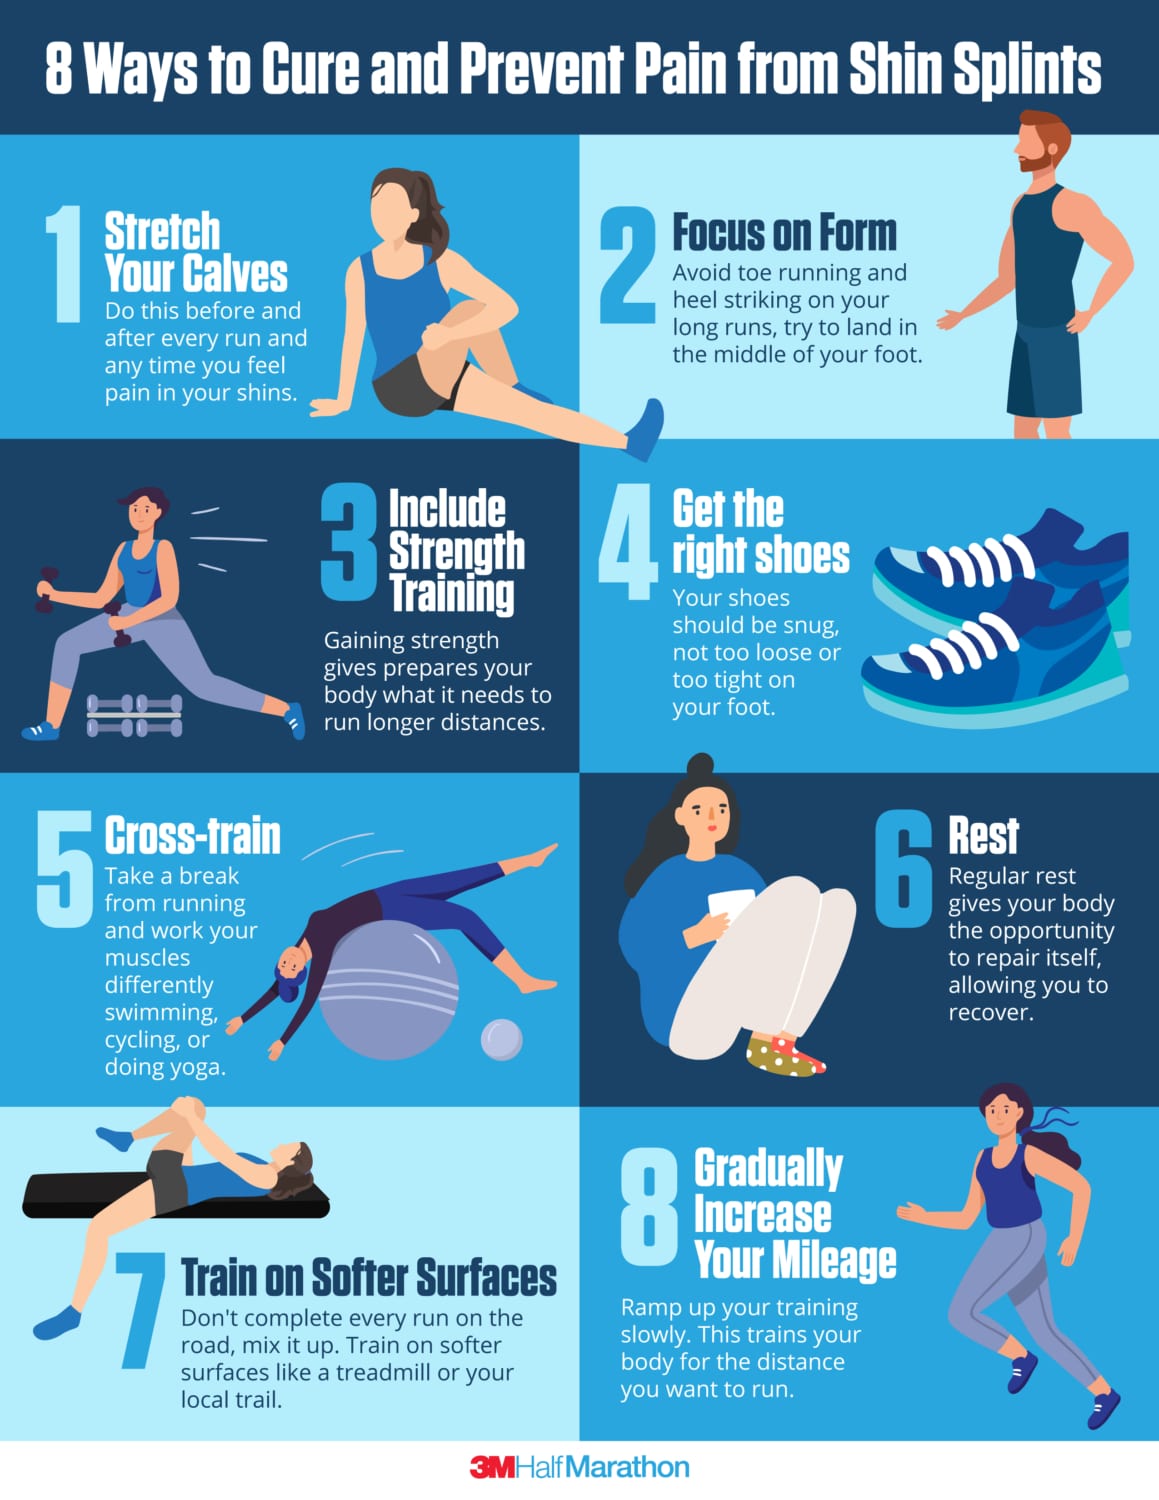 Image of an infographic breaking down 8 ways to cure and prevent pain from shin splints. 1. Stretch your calves before and after every run. 2. Focus on your form. Try landing in the middle of your foot on longs runs. 3. Include strength training. 4. Get the right shoes. Running in running shoes does make a difference! 5. Cross-train. Working muscles differently can strengthen them. 6. Rest. Give your body the opportunity to repair itself. 7 Train on softer surfaces like a treadmill or your local trail. 8. Gradually increase your mileage. Build your body up overtime to the desired mileage.